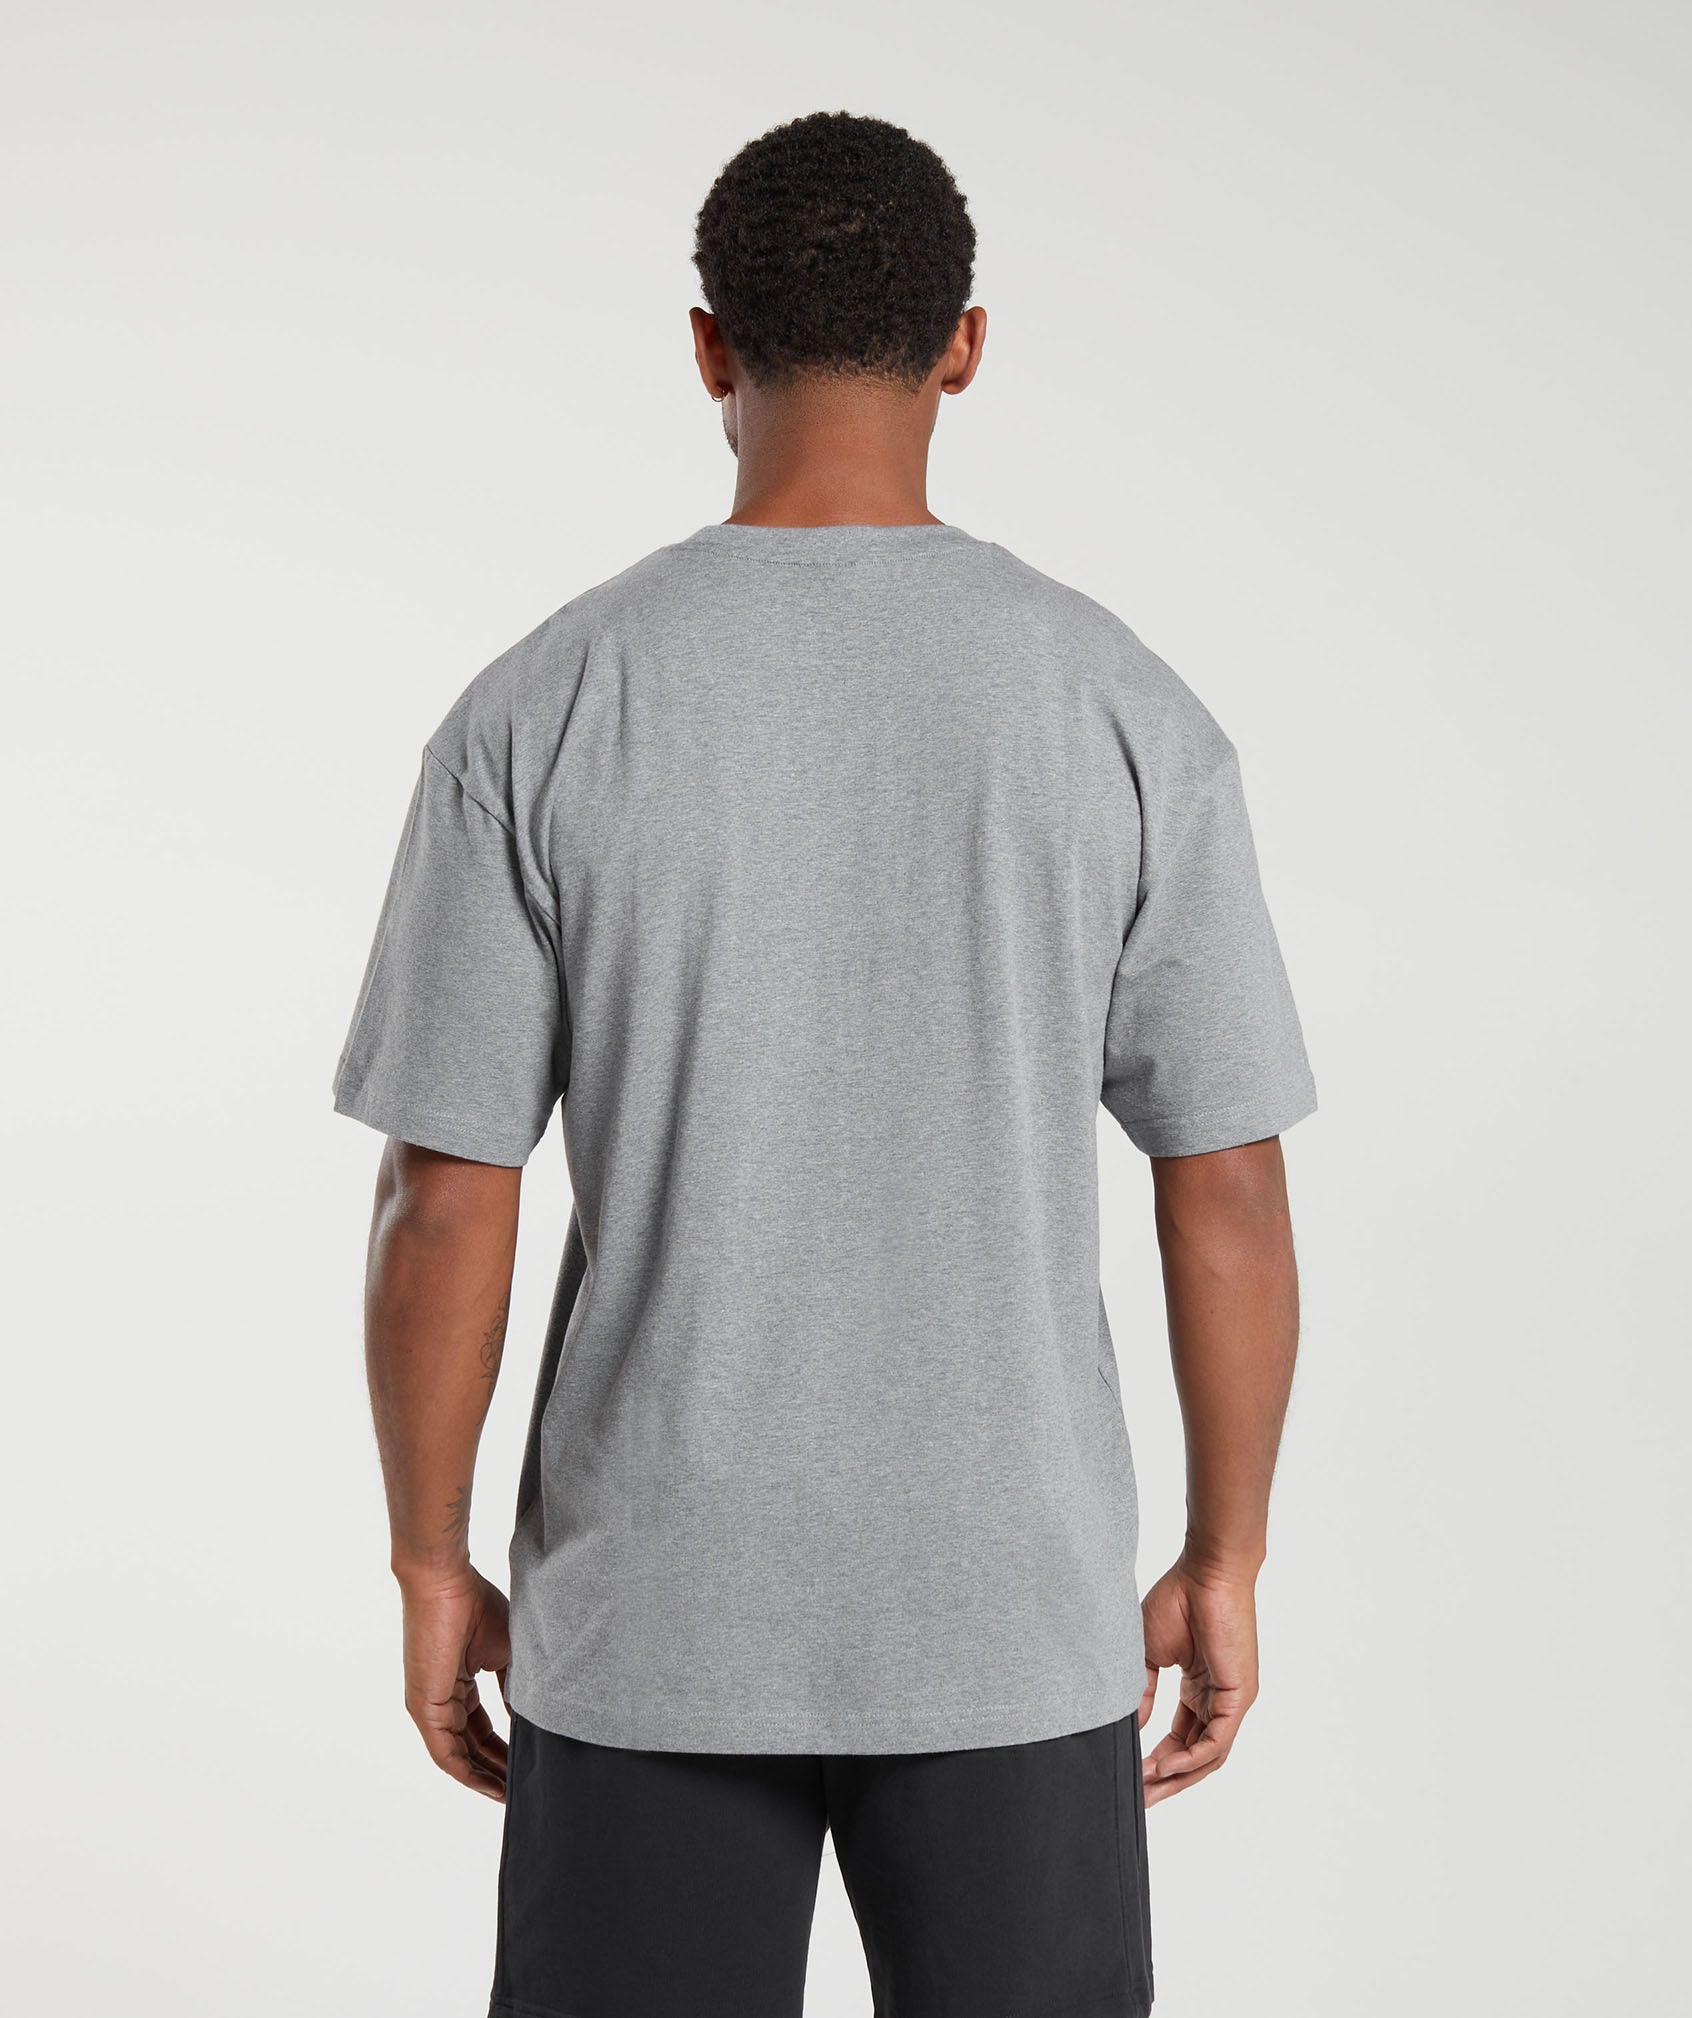 Essential Oversized T-Shirt in Charcoal Grey Marl